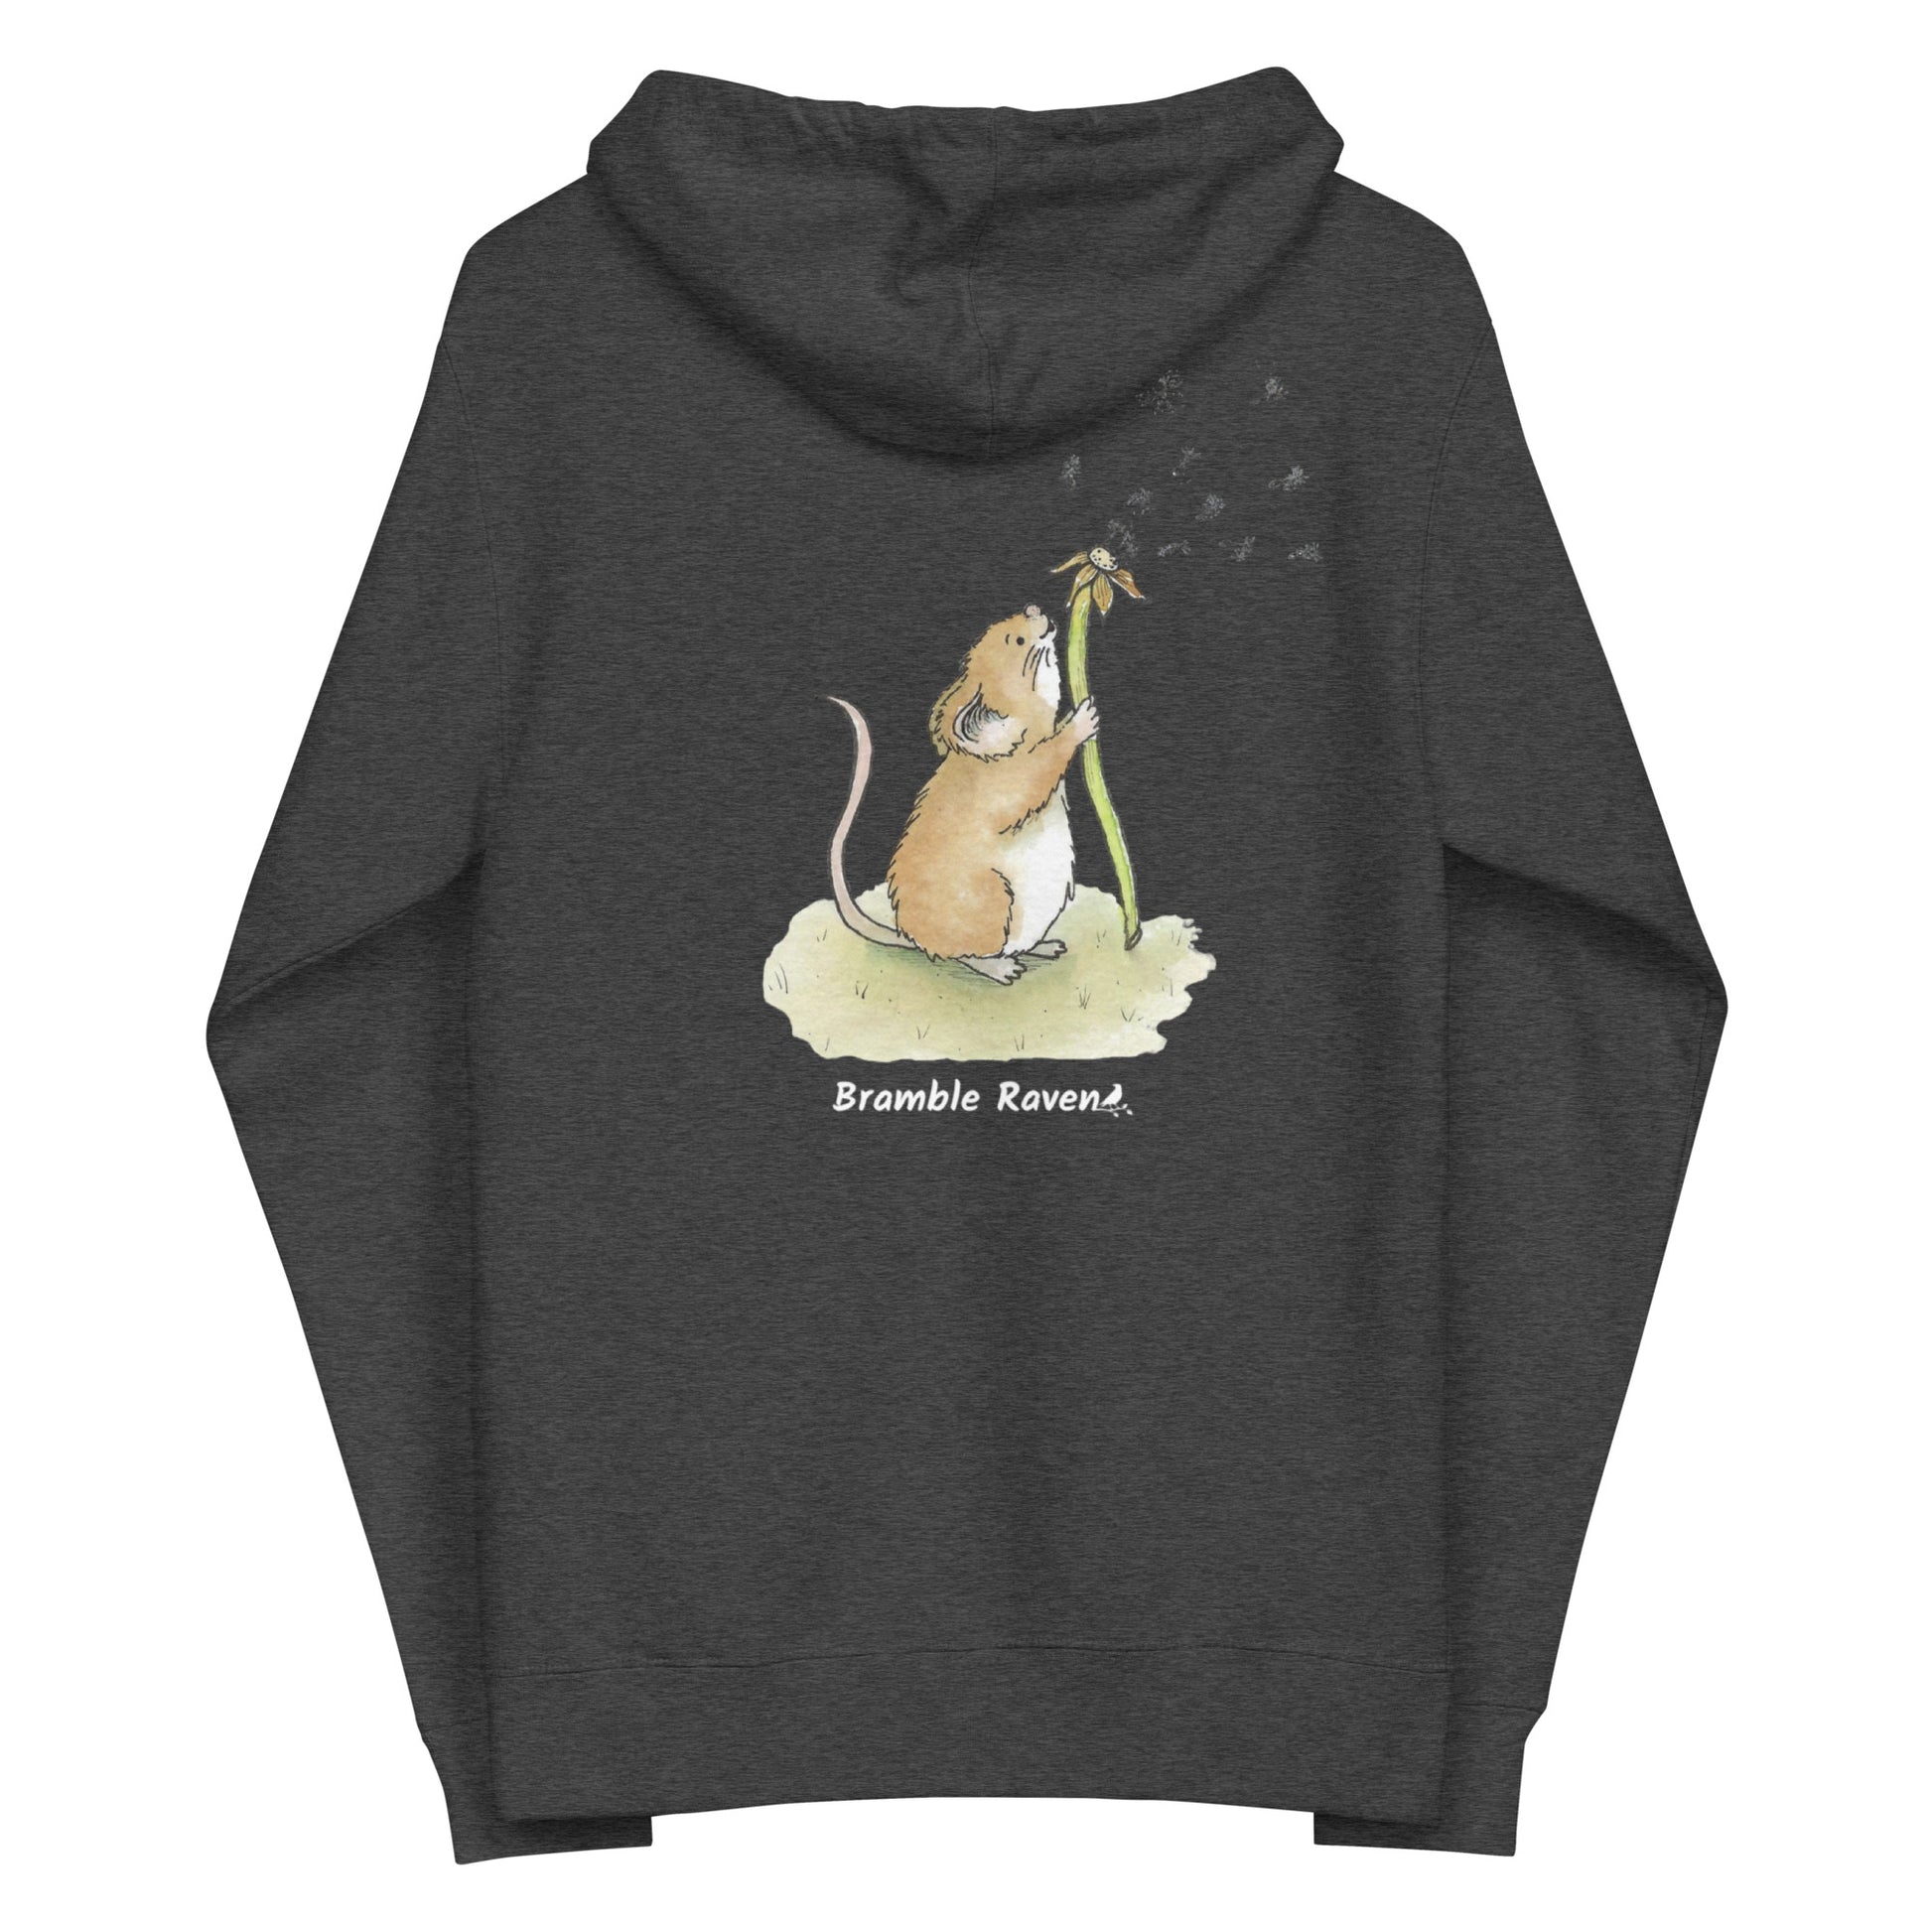 Dandelion wish design of cute watercolor mouse blowing dandelion seeds on the back of a charcoal gray fleece zip up hoodie